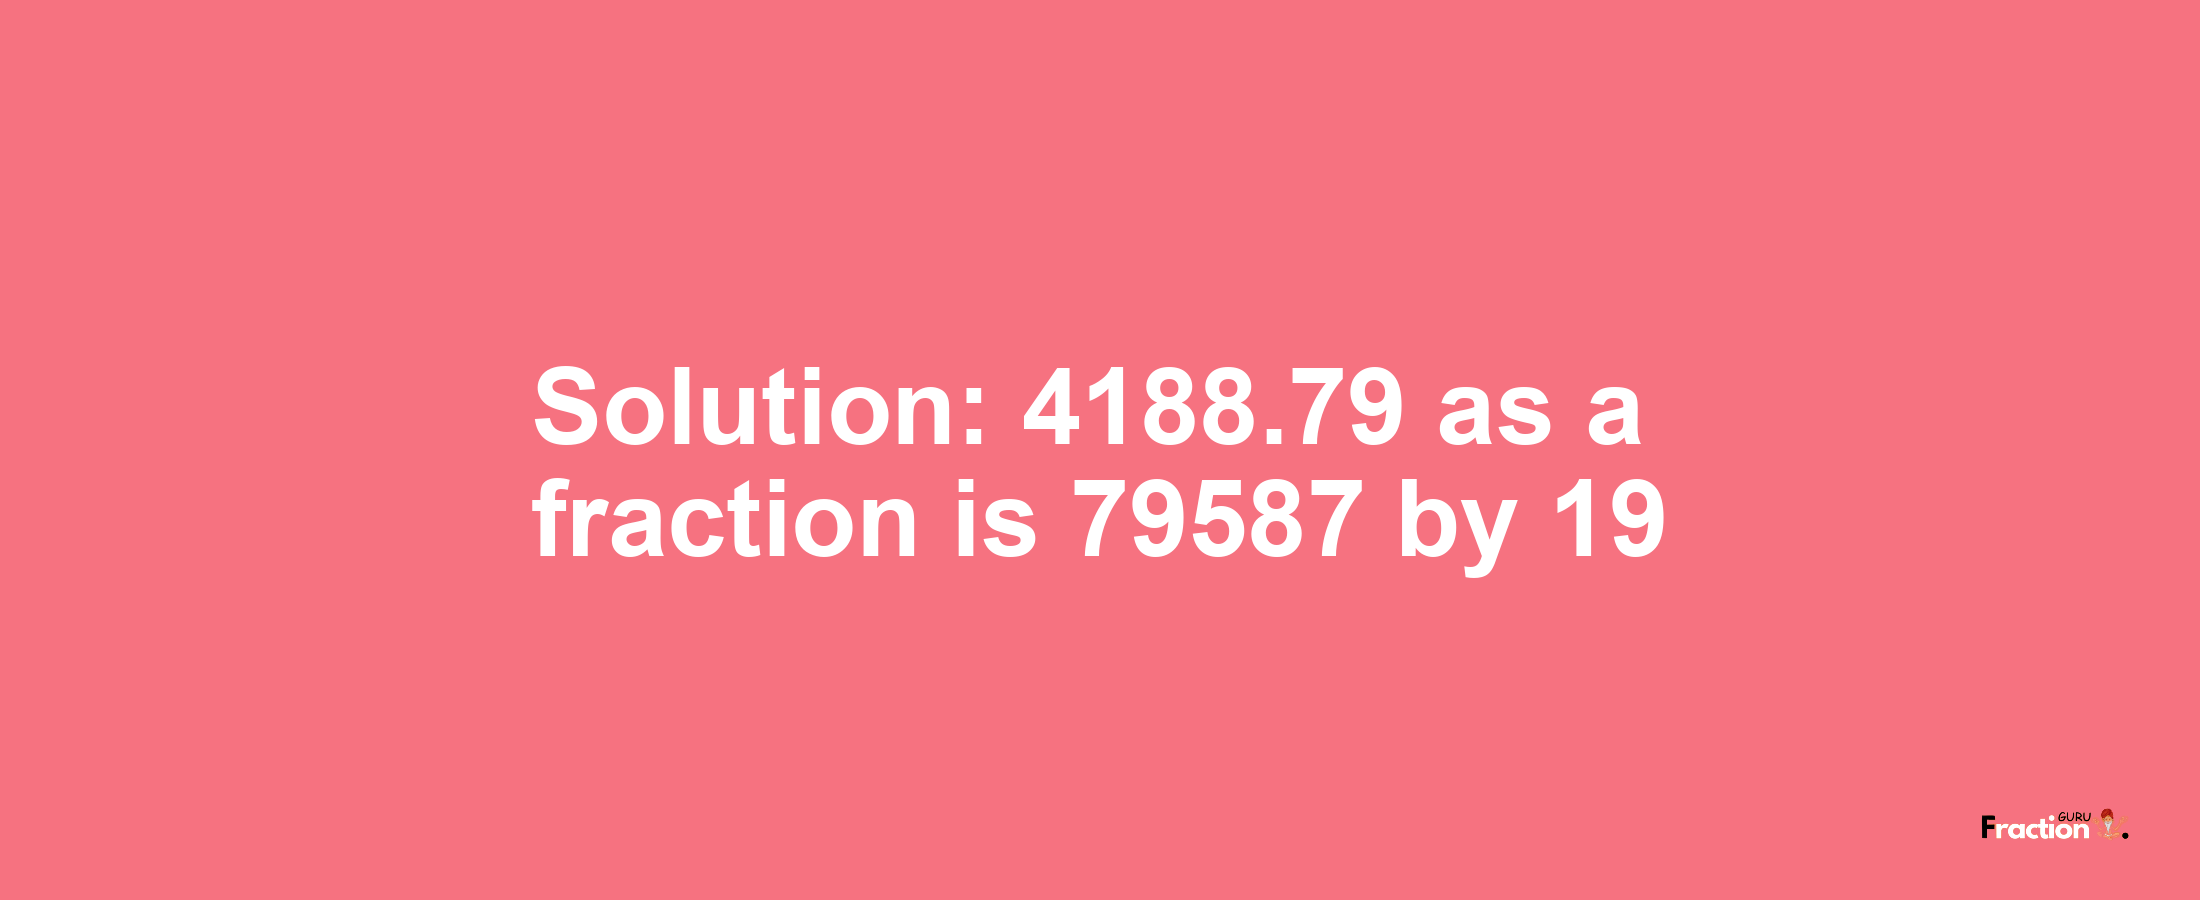 Solution:4188.79 as a fraction is 79587/19